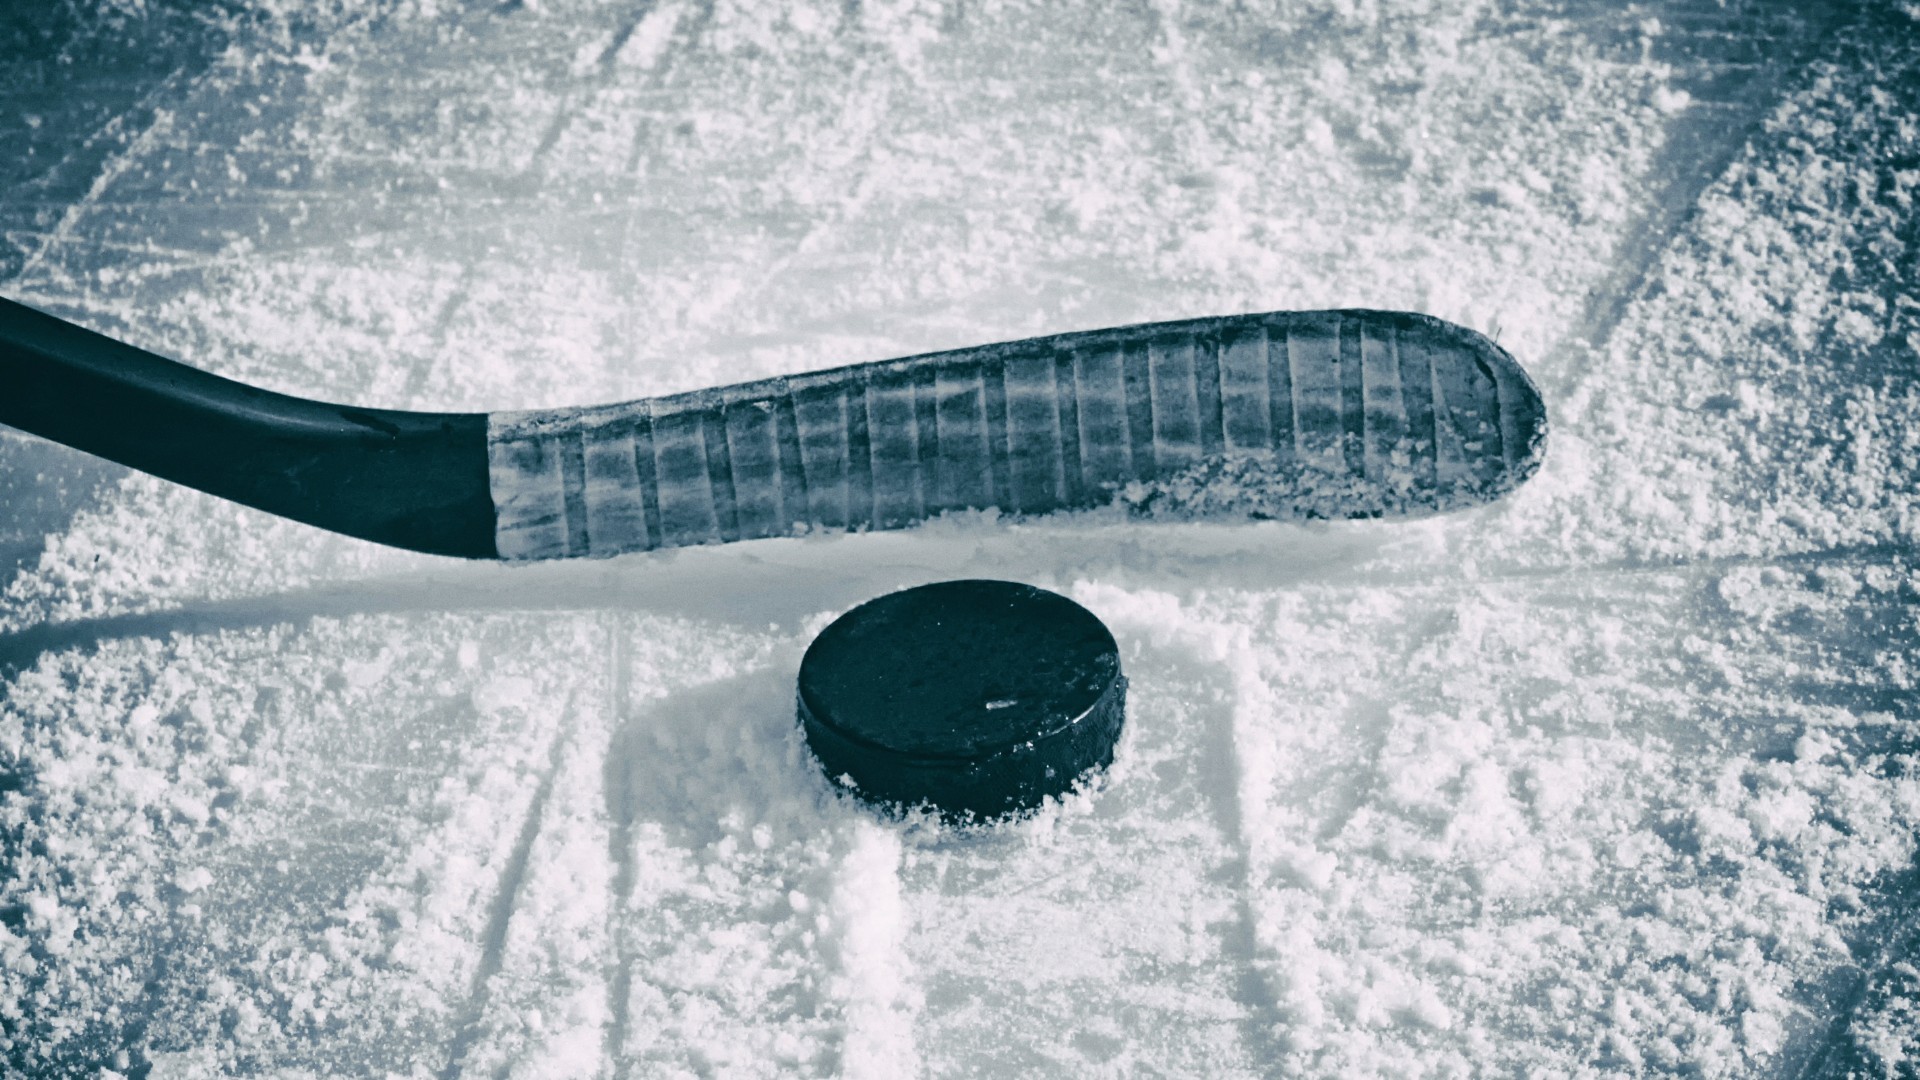 1920x1080 Hockey stick and puck on the ice wallpaper